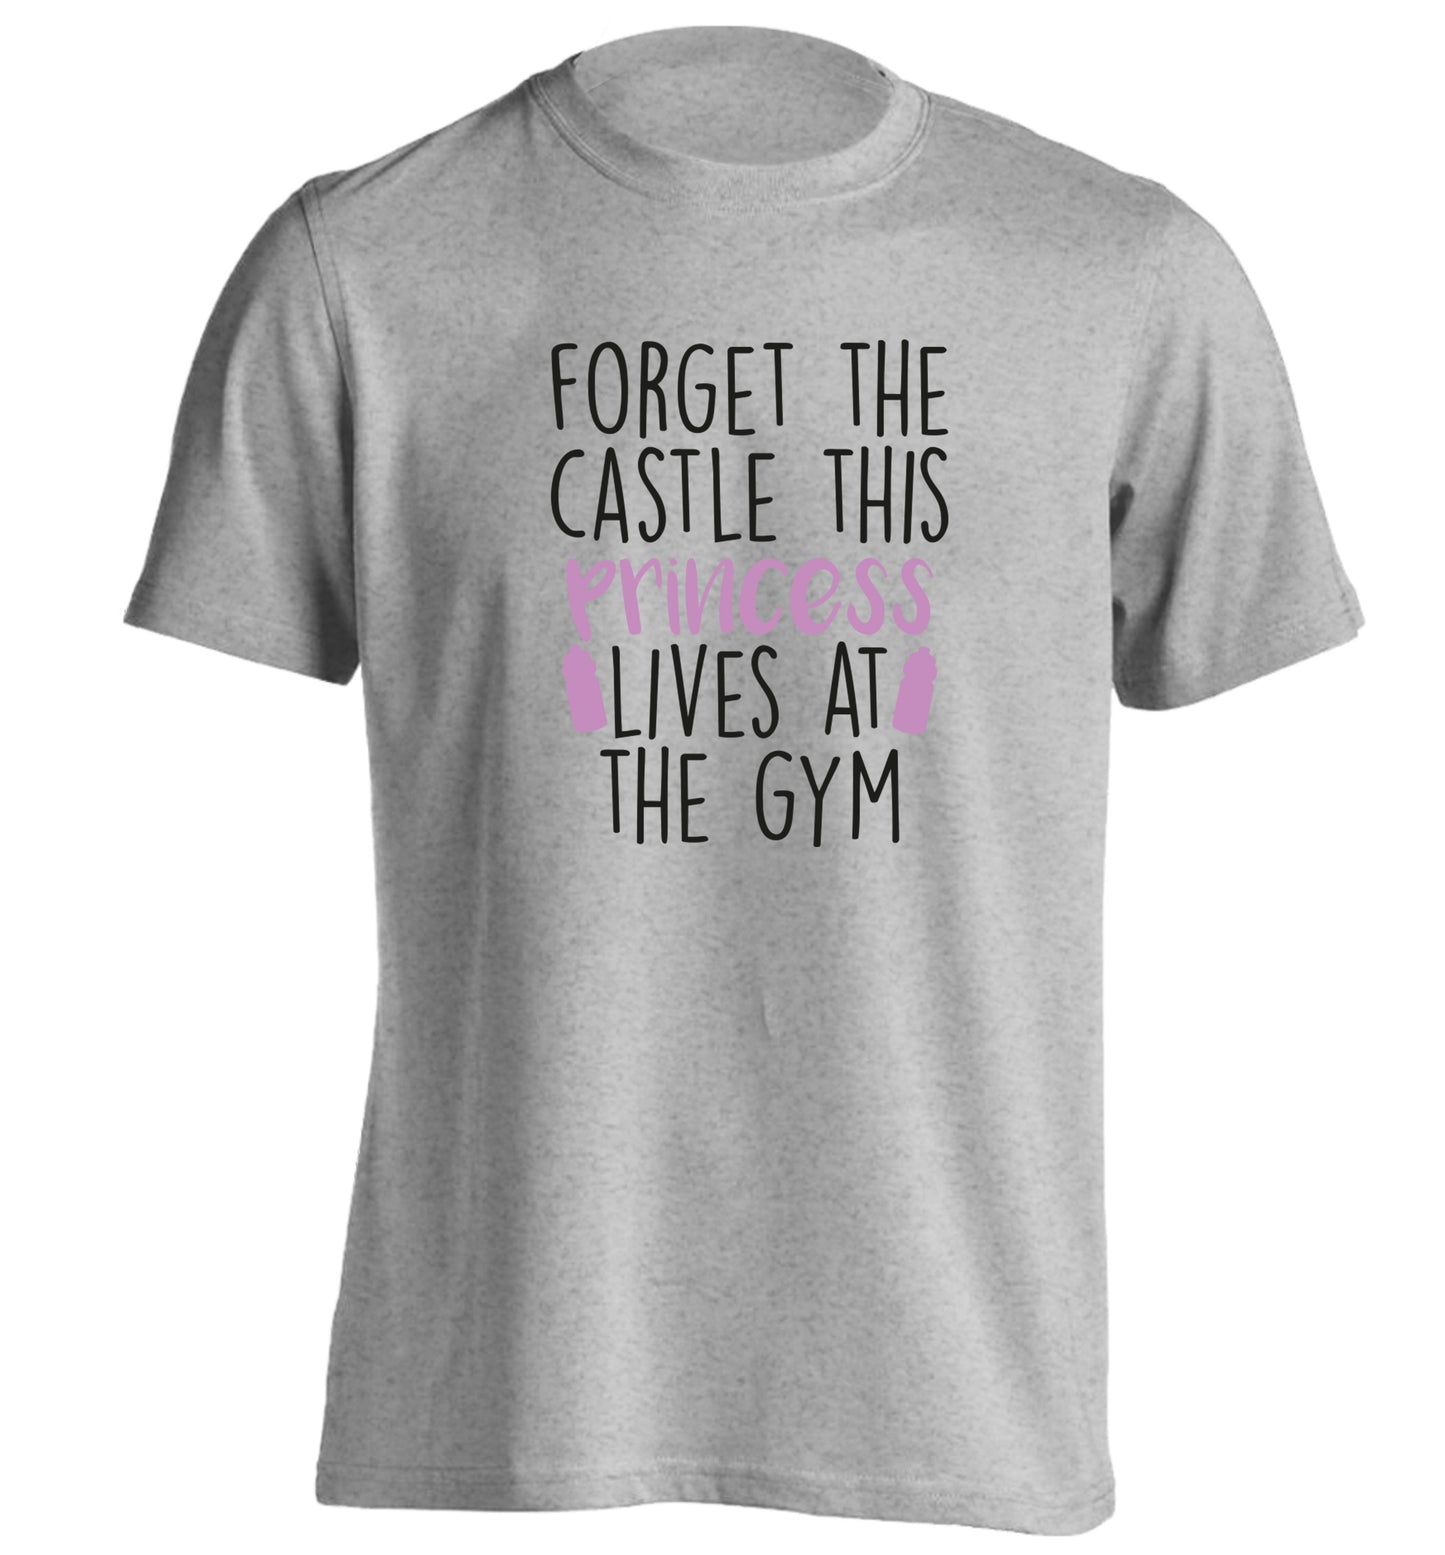 Forget the castle this princess lives at the gym adults unisex grey Tshirt 2XL